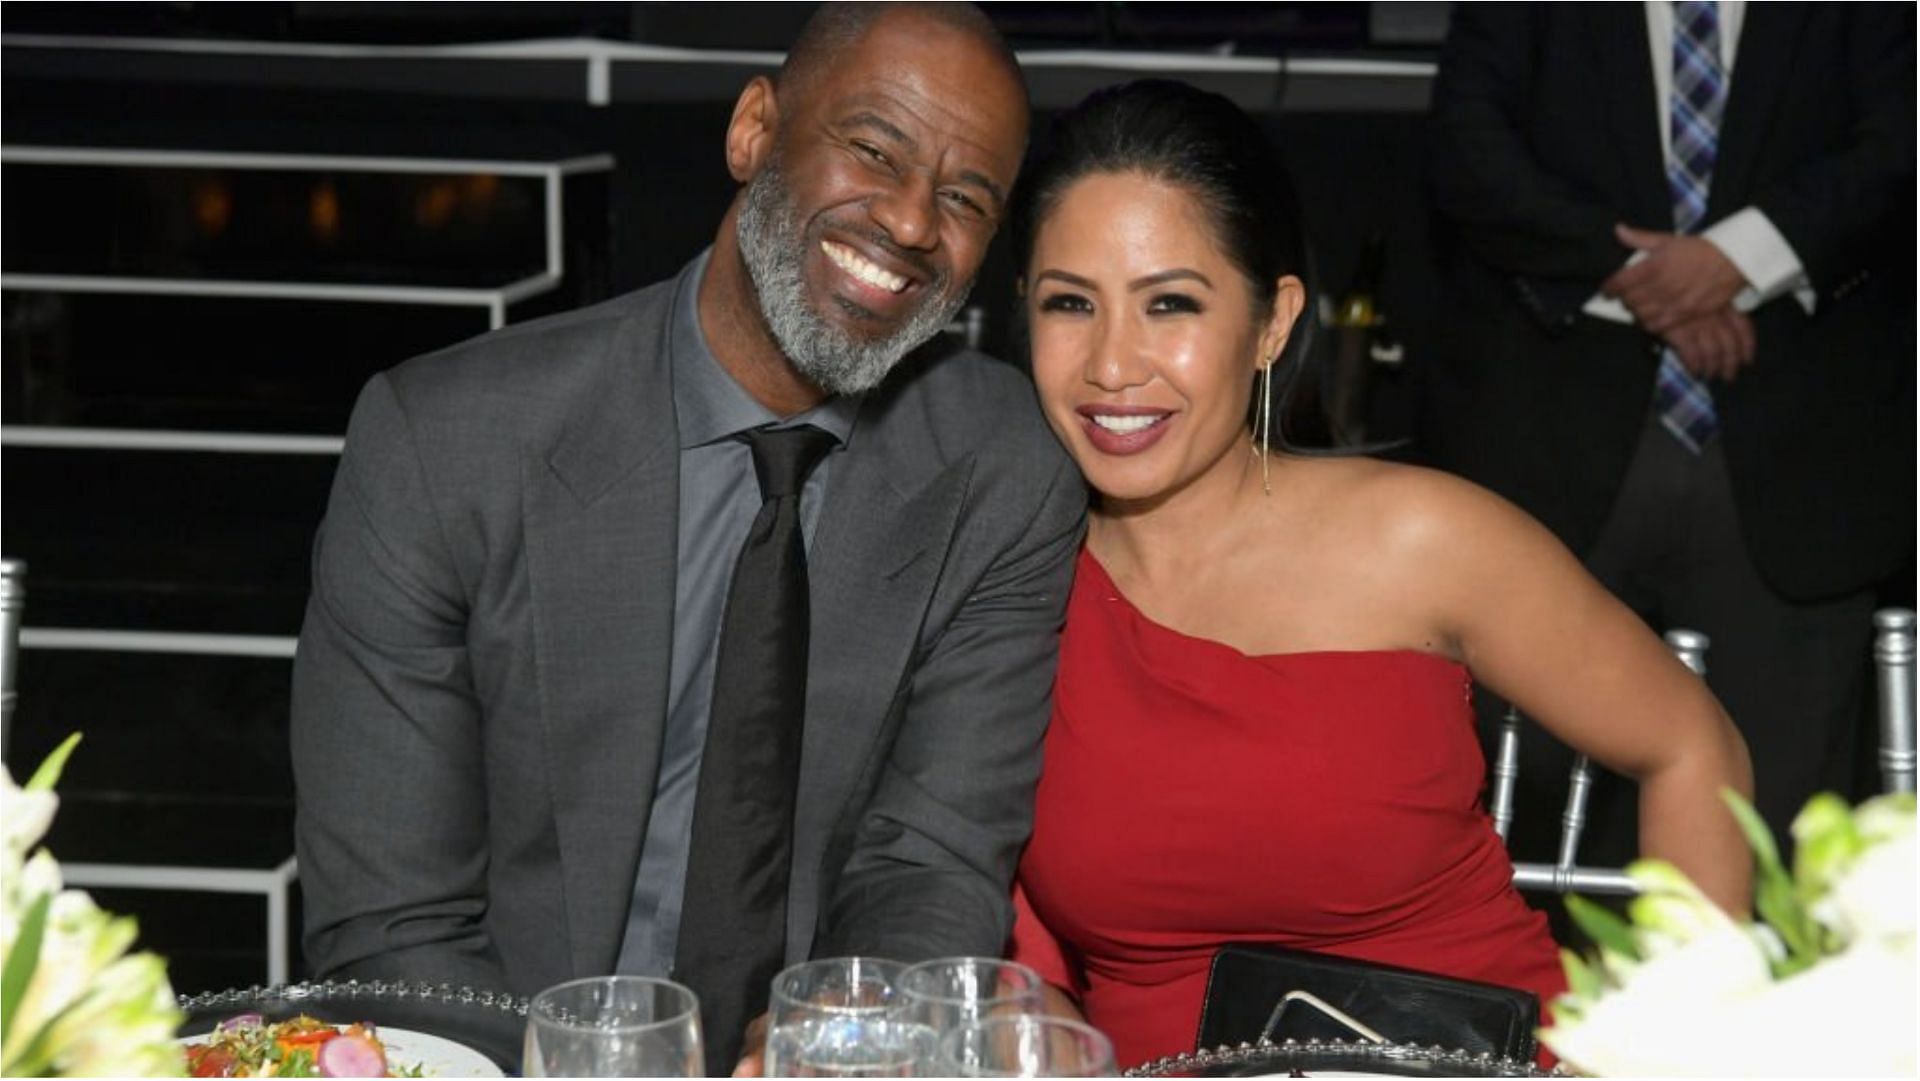 Brian McKnight and Leilani Mendoza are expecting another baby (Image via Emma McIntyre/Getty Images)